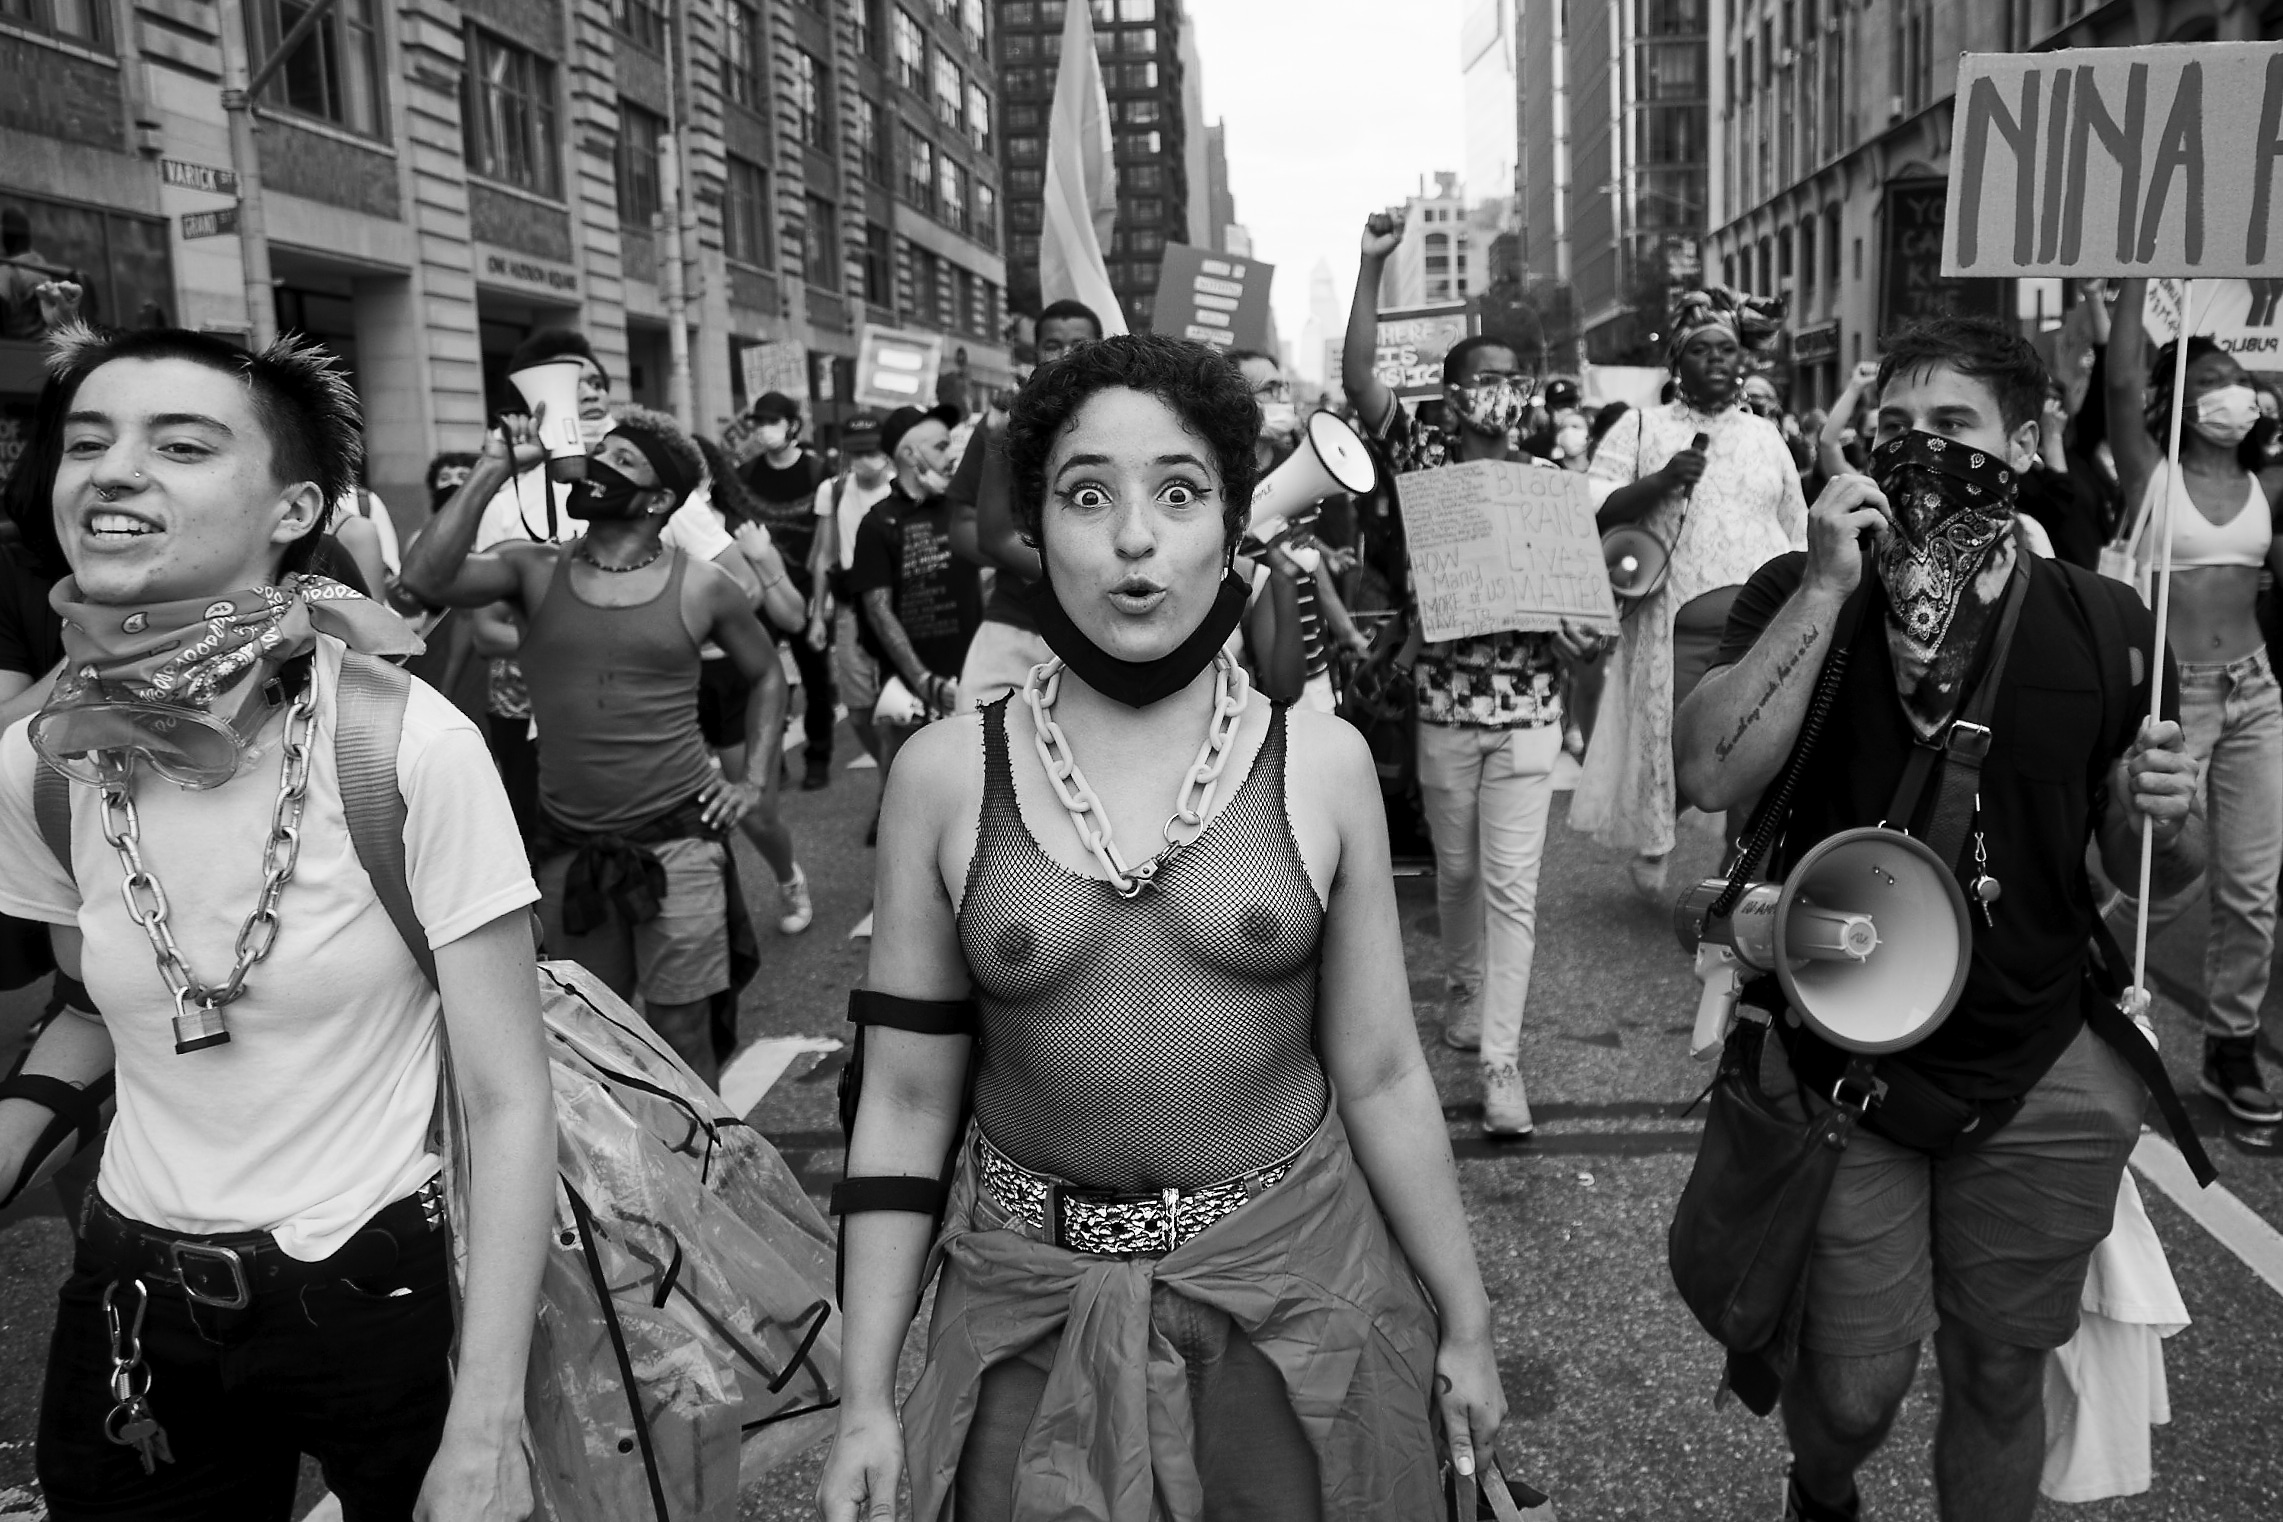 20200724-1_NYC_Protests_BlackTransLiberationMarch_02_0888_SeanWaltrous